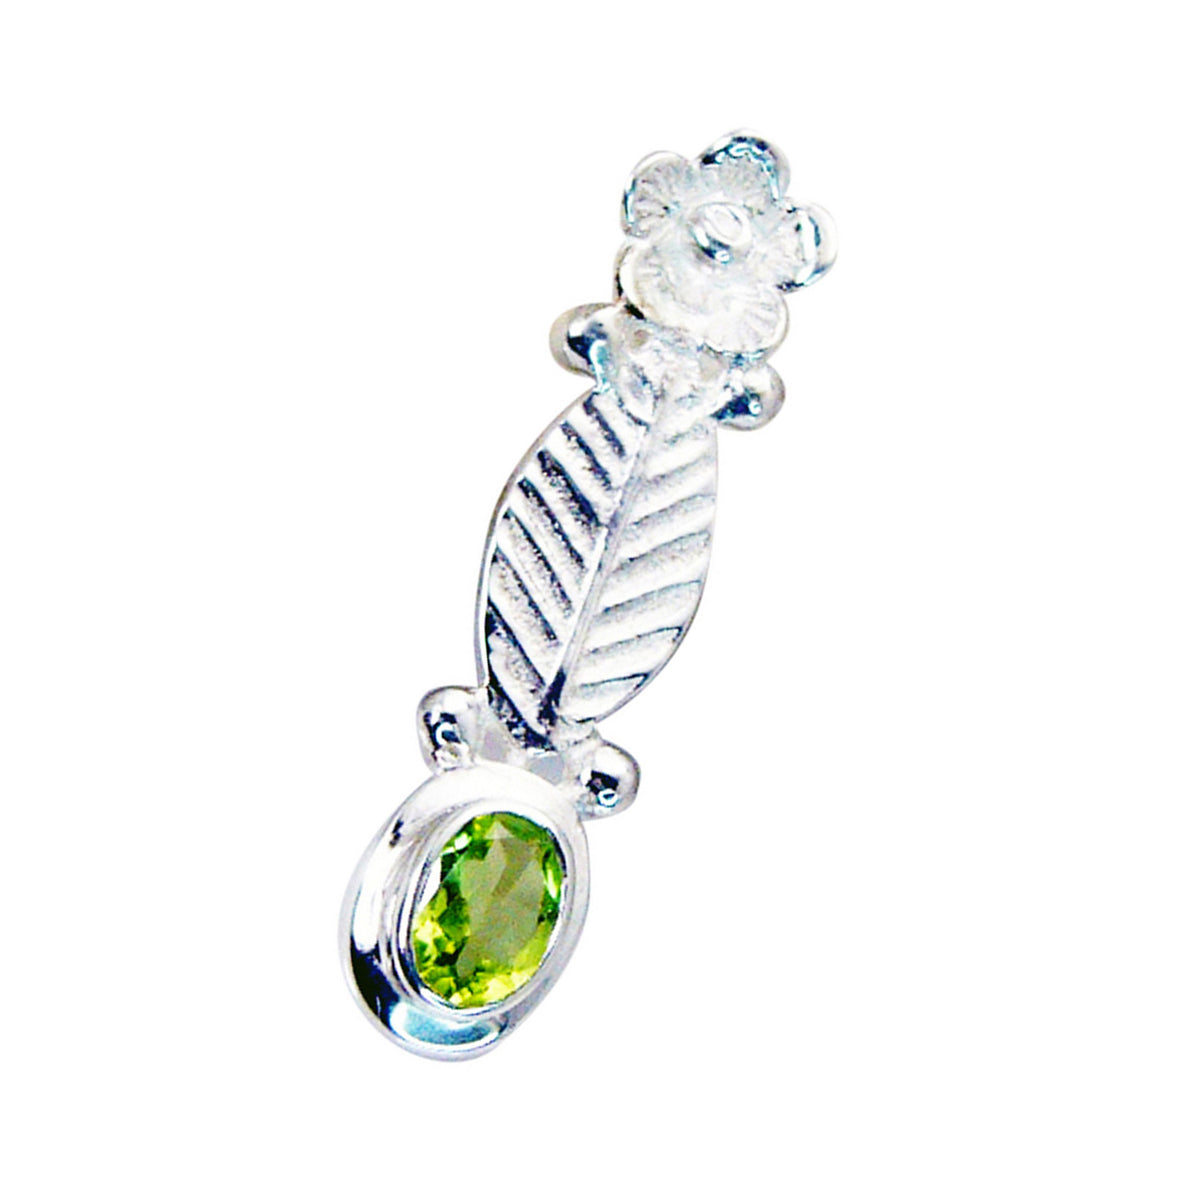 Riyo Smashing Gemstone Oval Faceted Green Peridot 958 Sterling Silver Pendant Gift For Good Friday